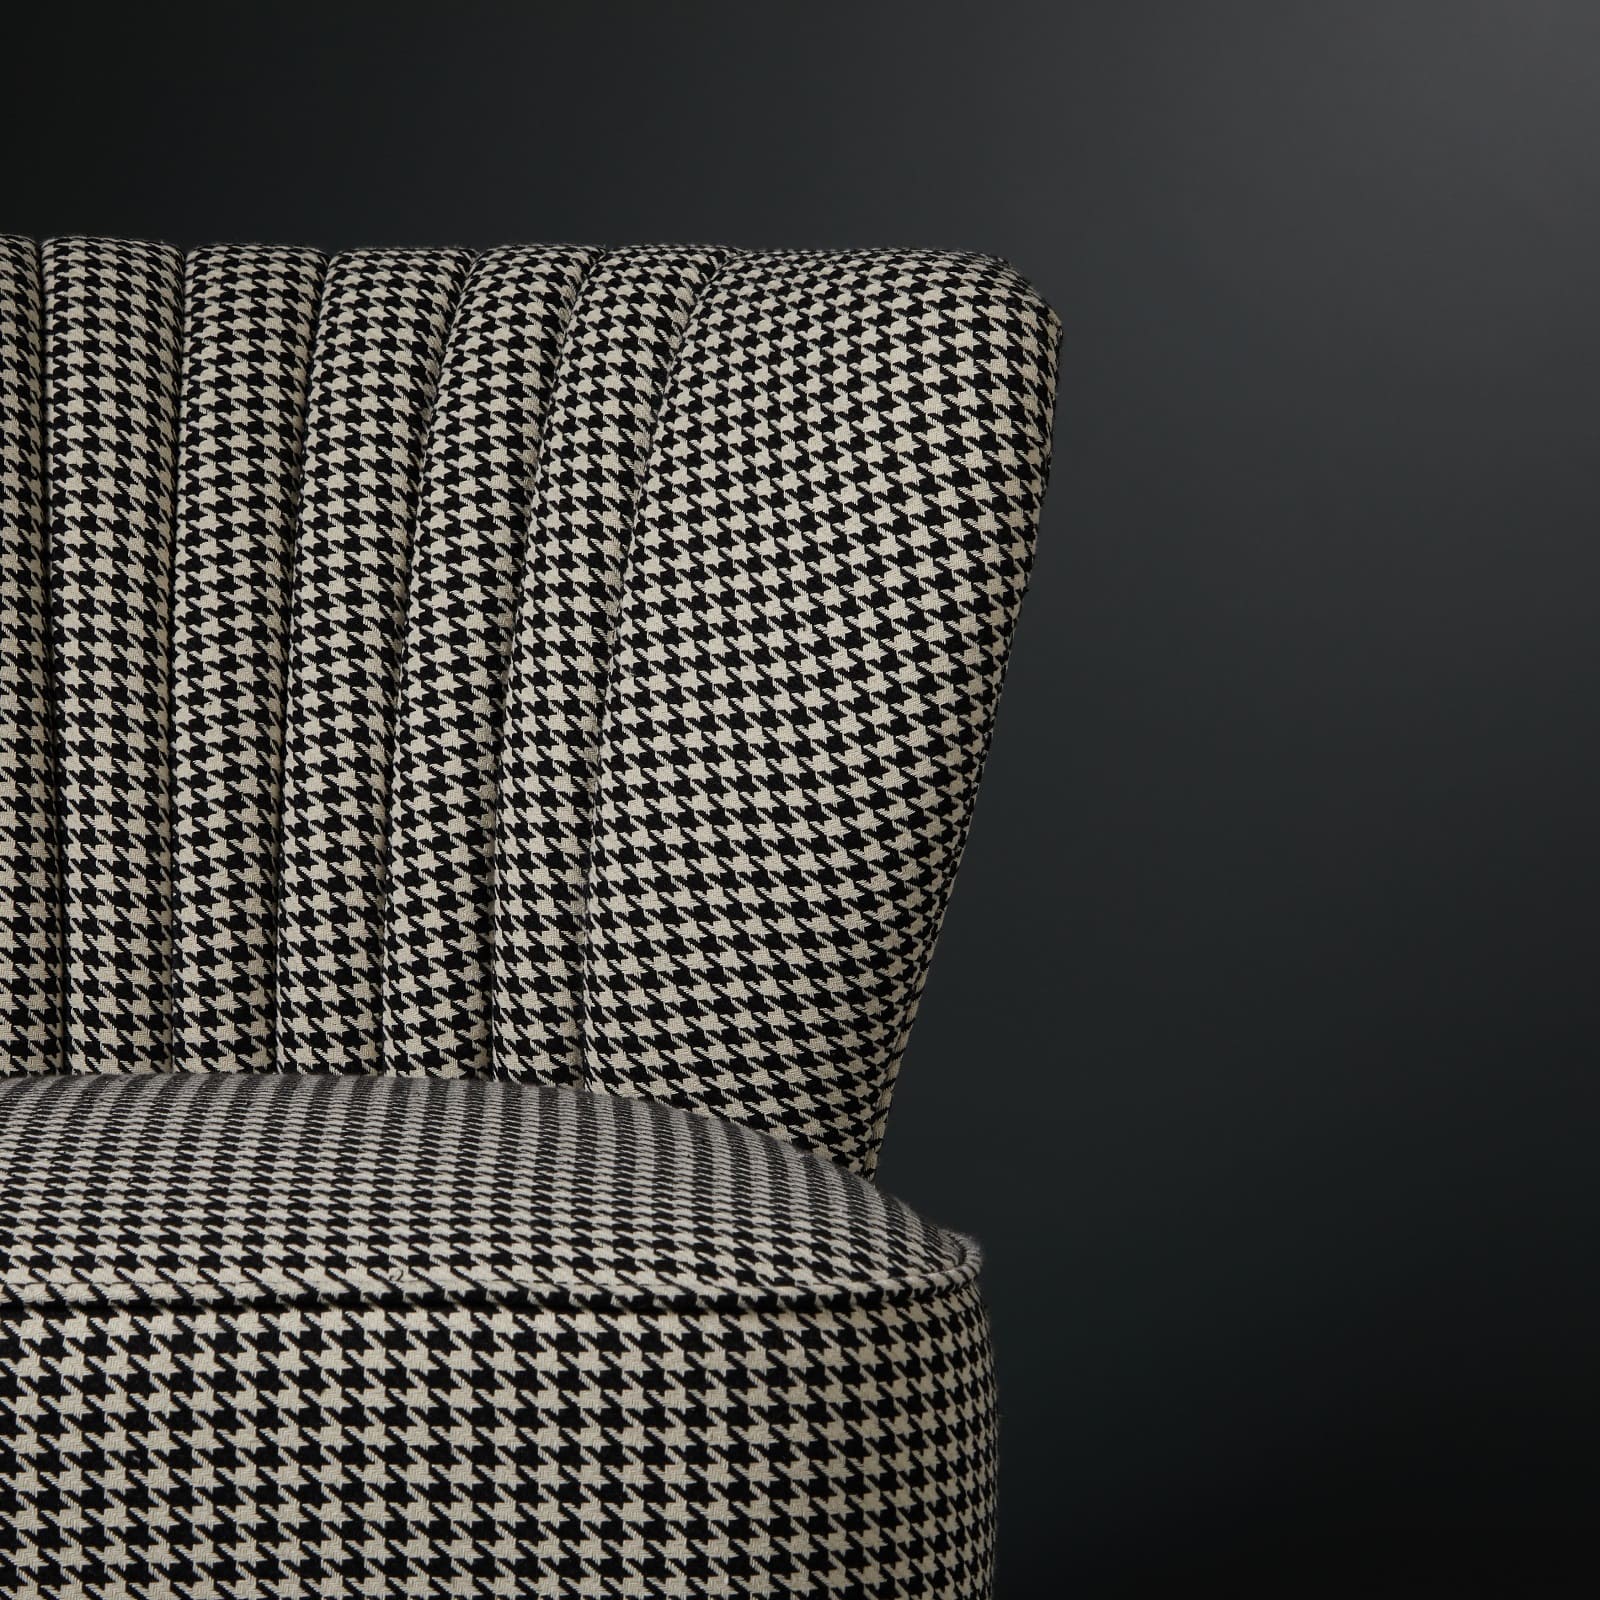 Chair Retro Houndstooth